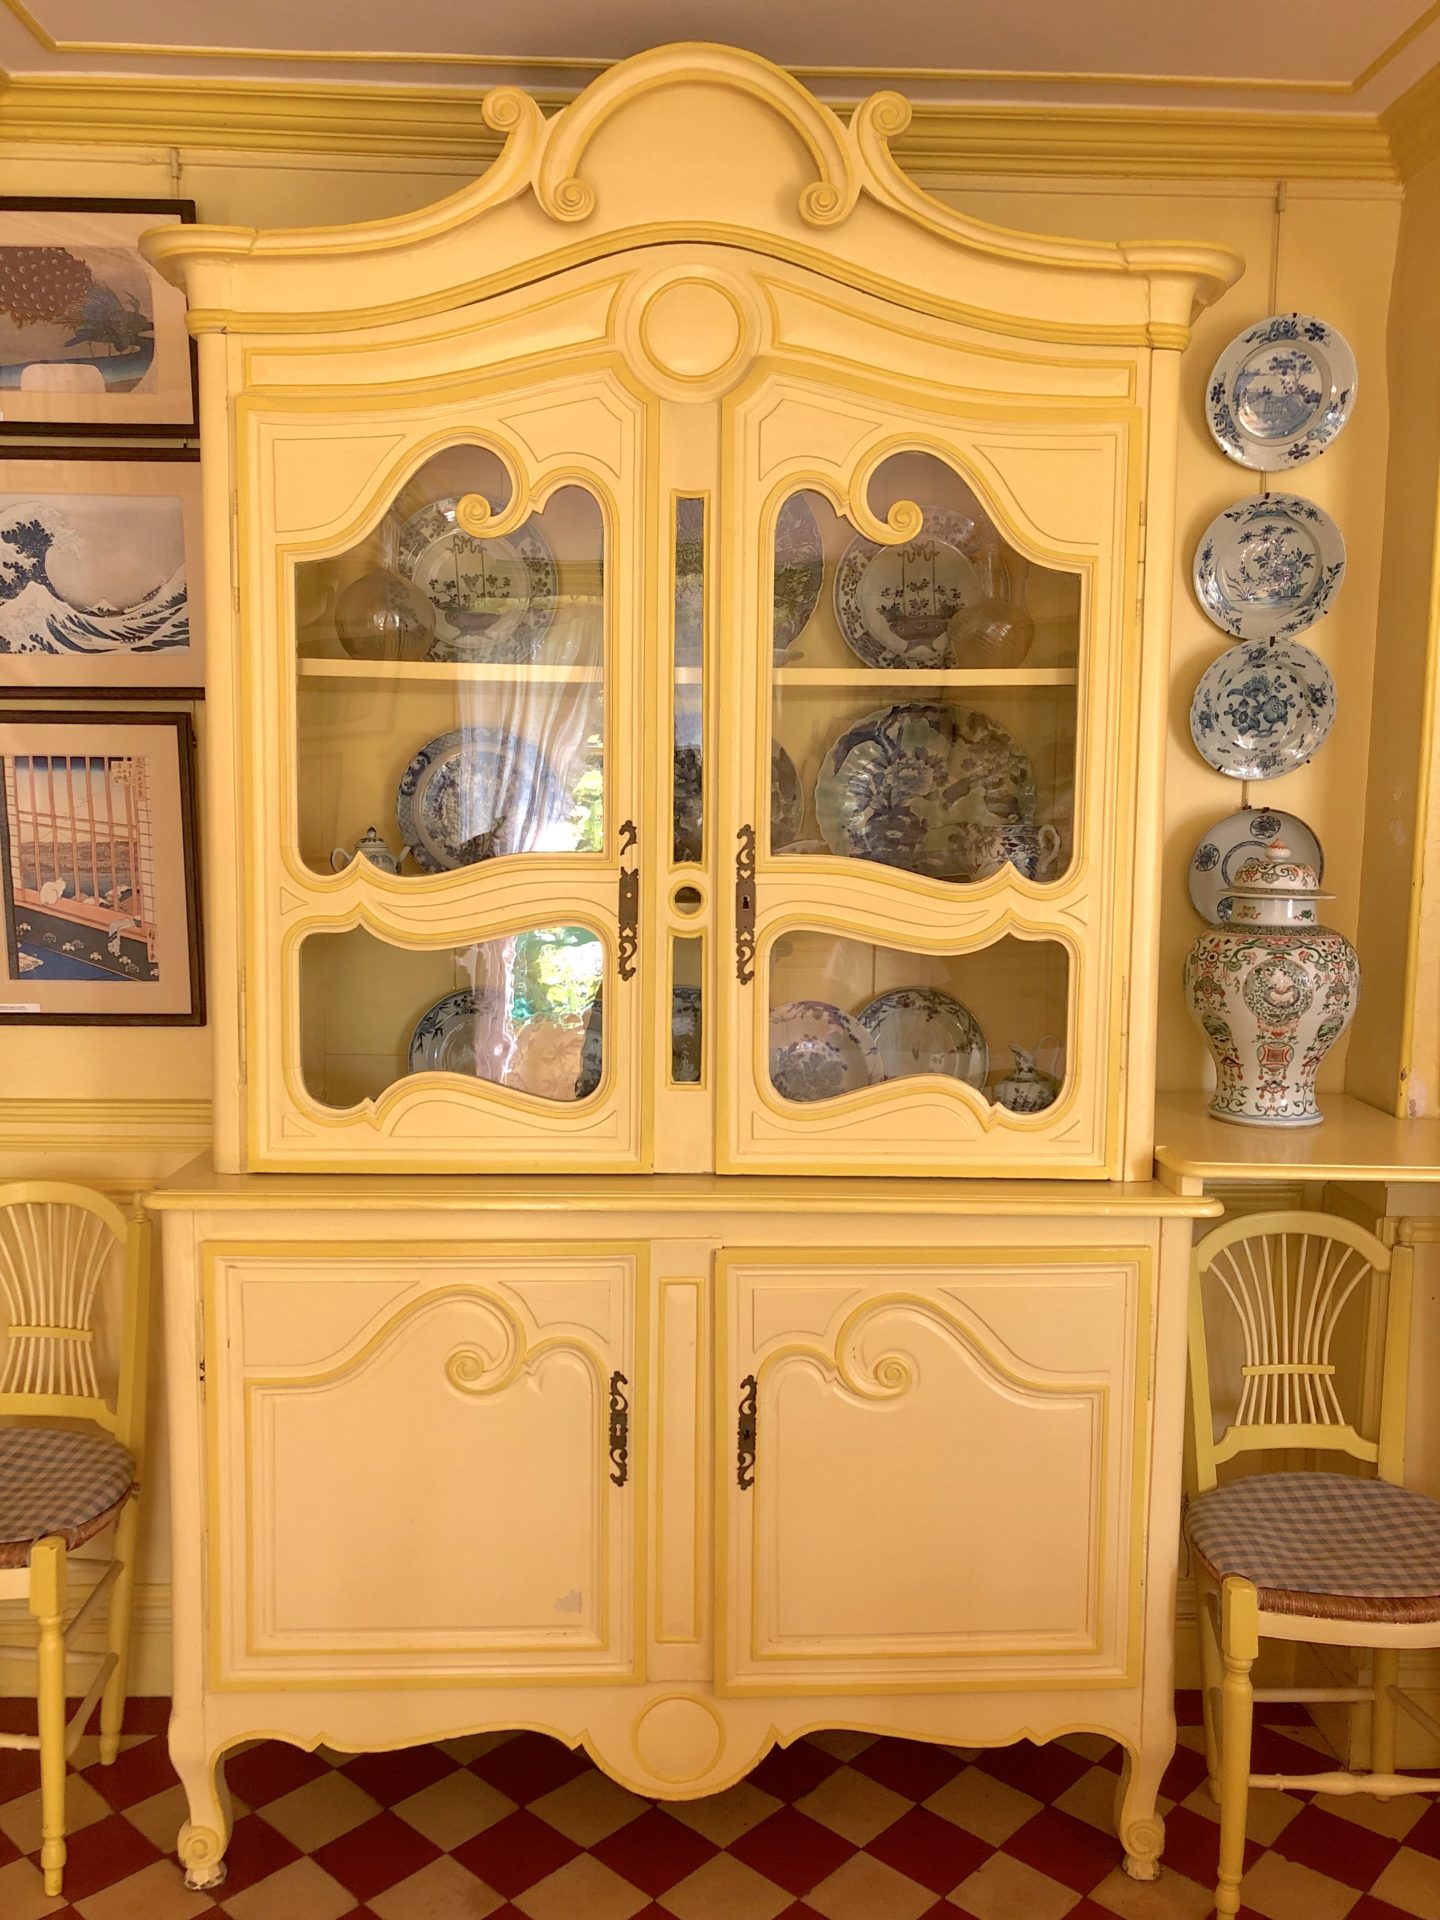 Monet's yellow dining room, The yellow french dresser looks like the armoire from Disneys Beauty and the Beast.